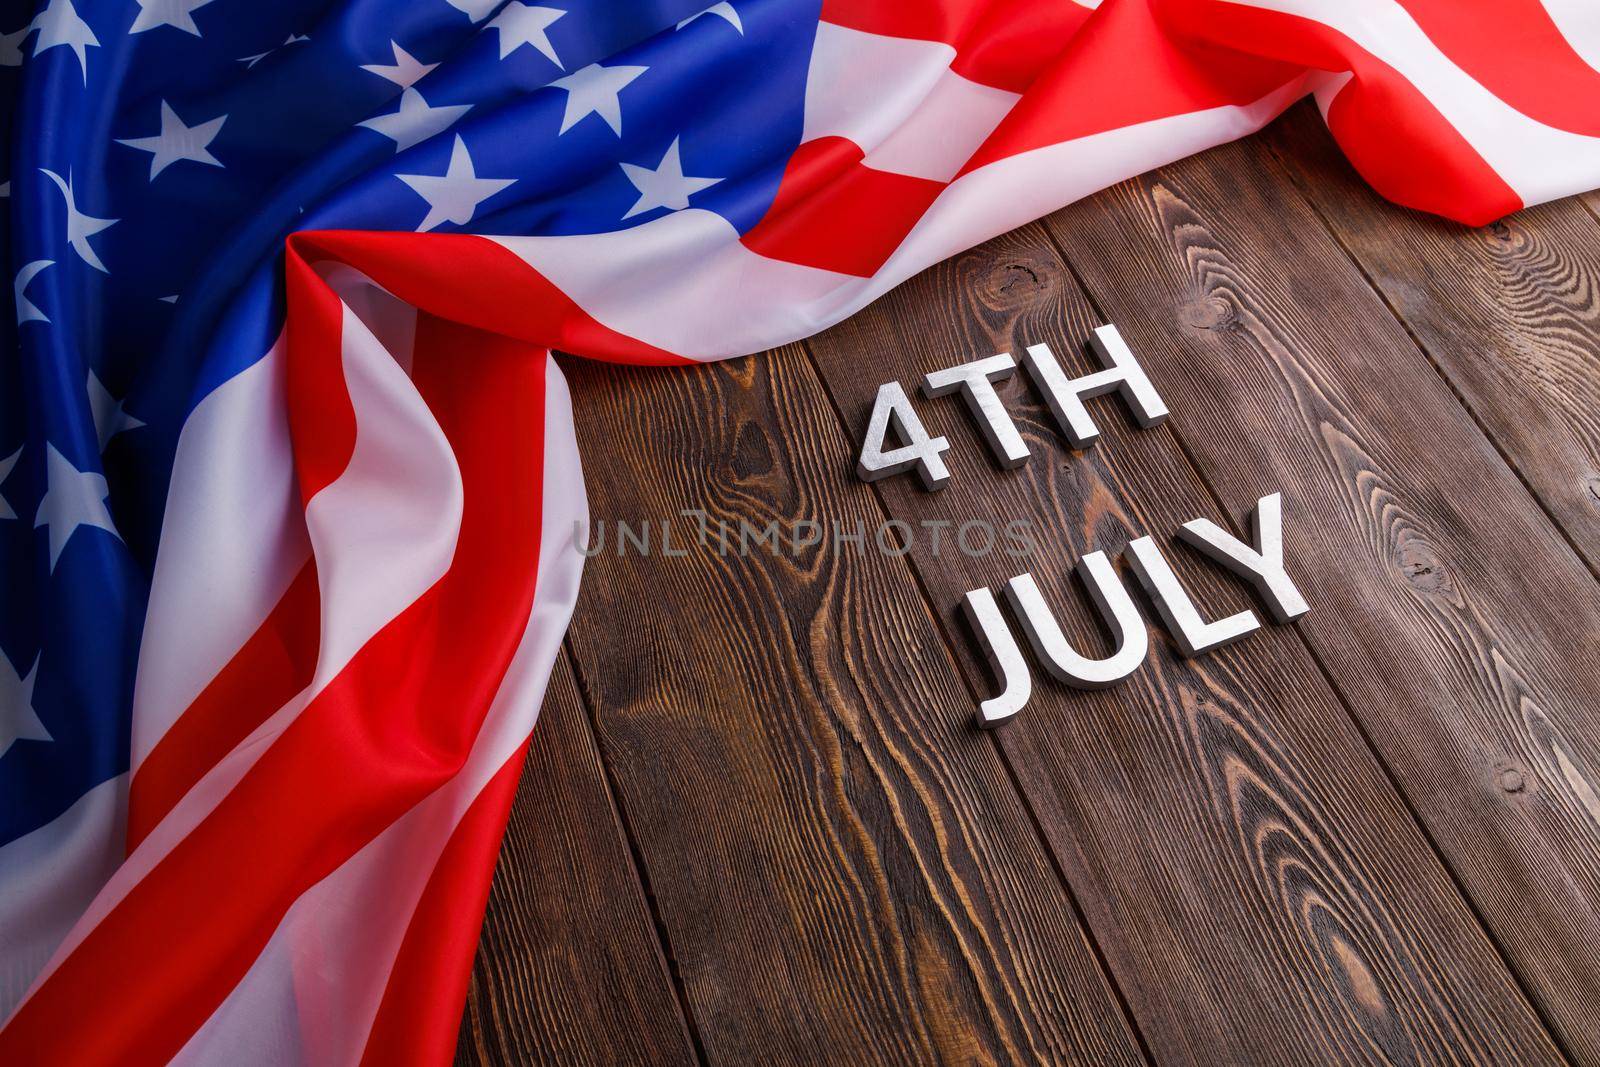 the words 4th july and crumpled usa flag on flat textured wooden surface background.